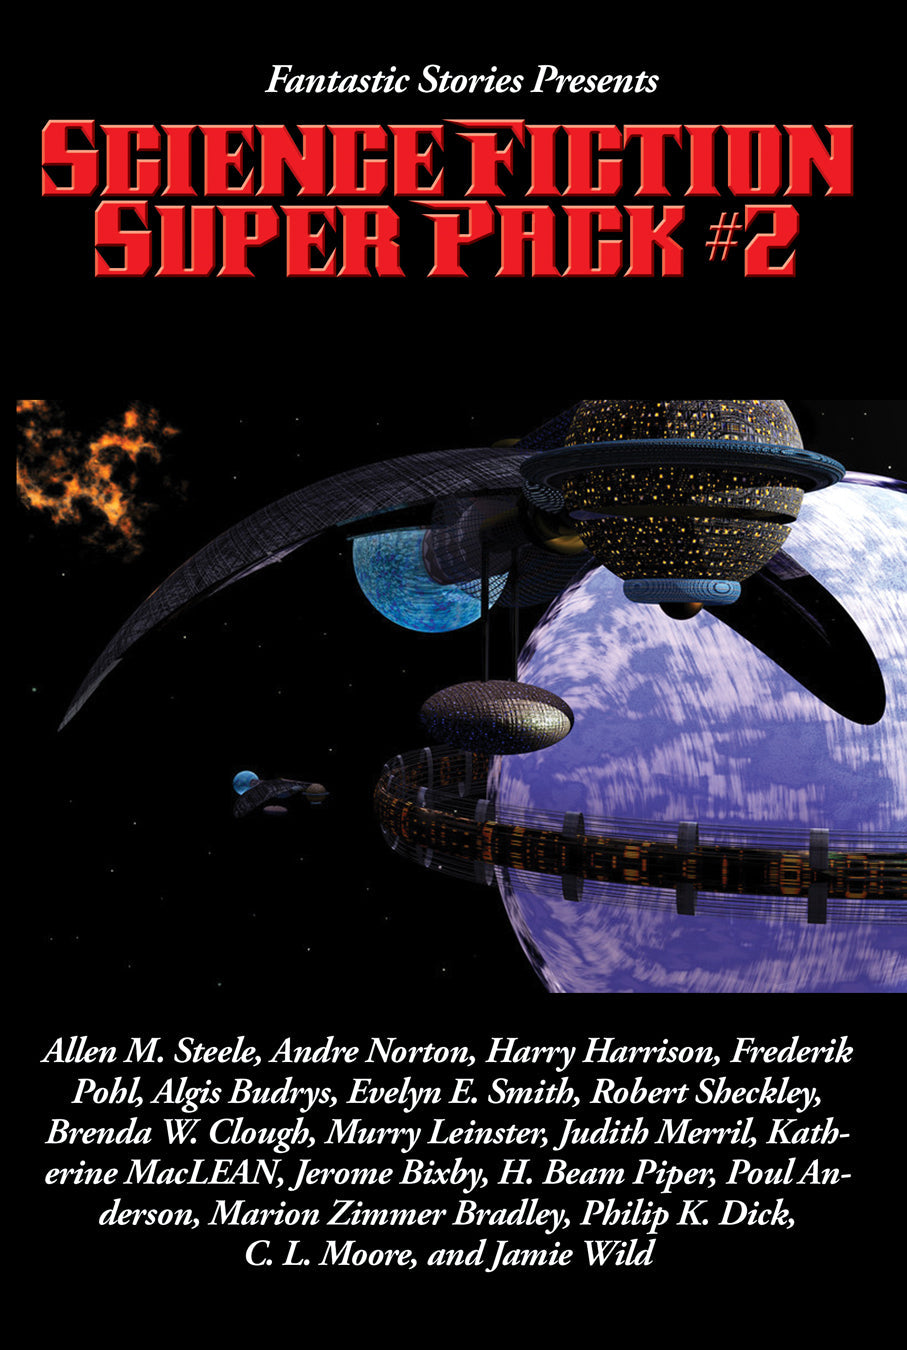 Cover art for Positronic Super Pack #5, the second Science Fiction Super Pack.